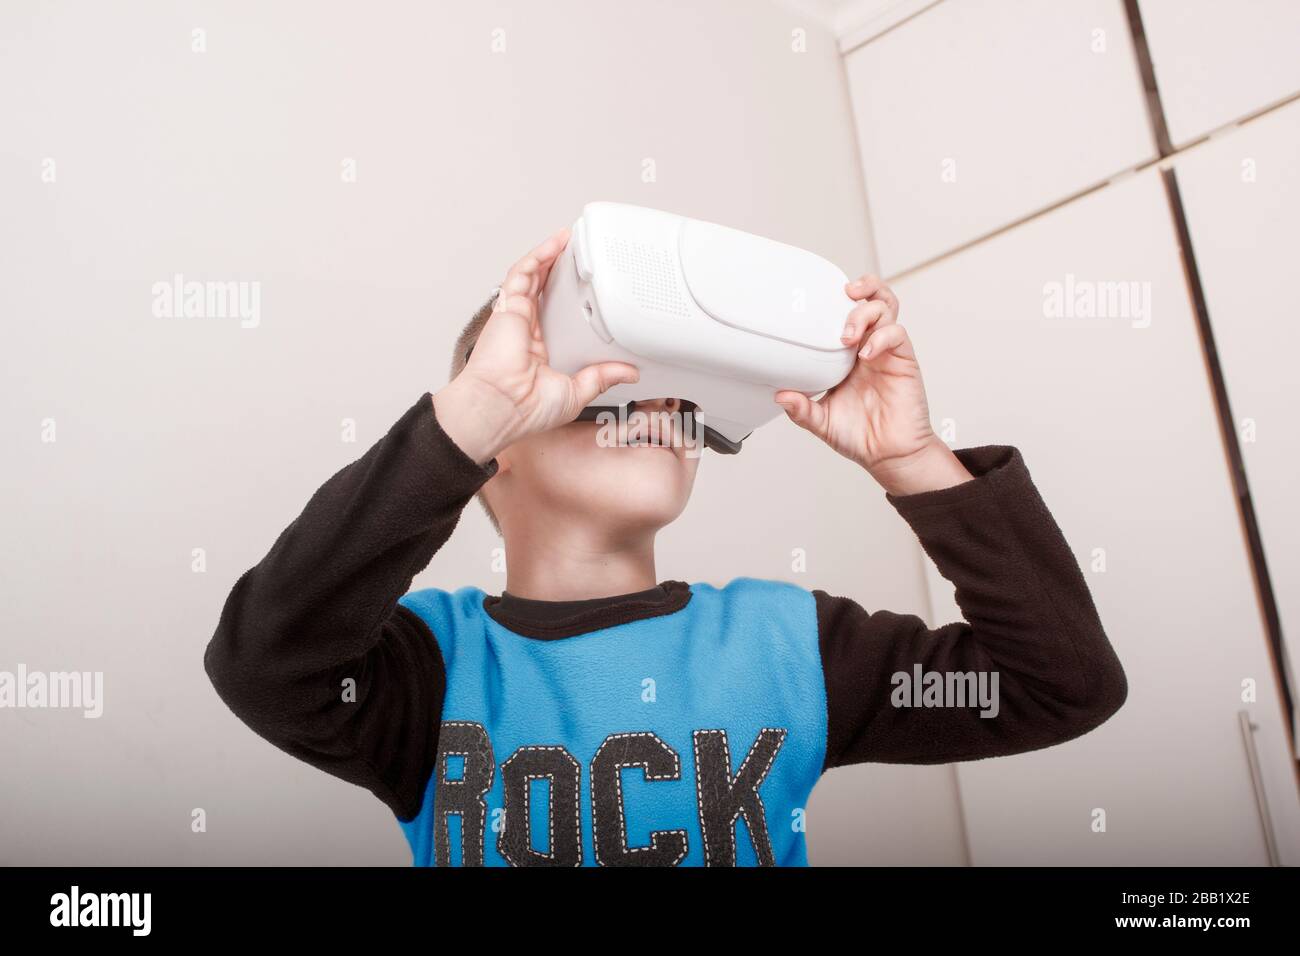 A young boy with VR (Virtual Reality) Goggles or Glasses Stock Photo